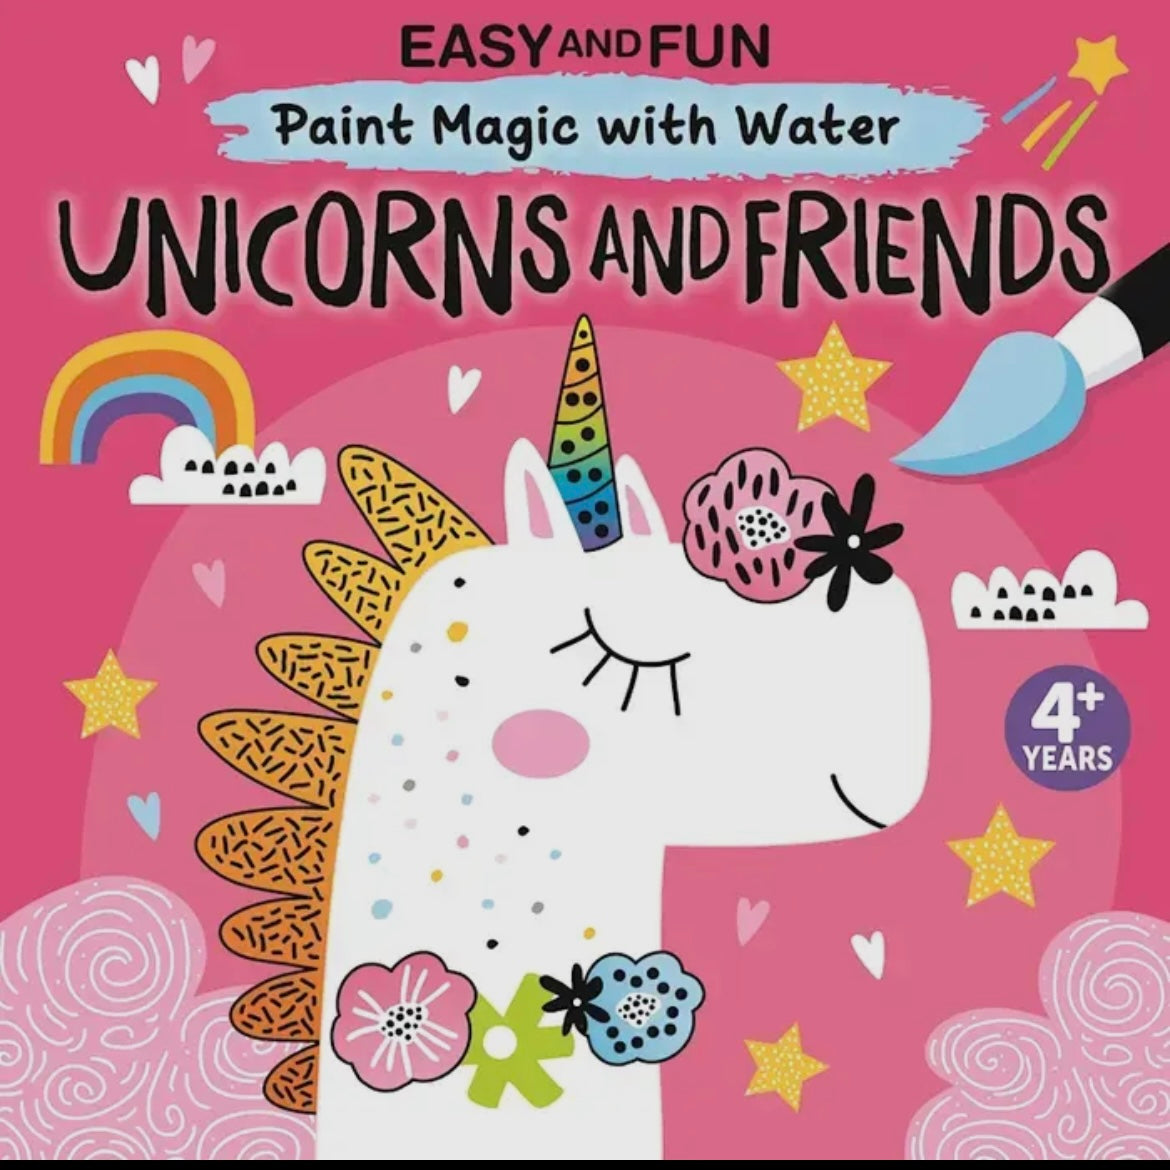 Paint Magic with Water: Unicorns and Friends